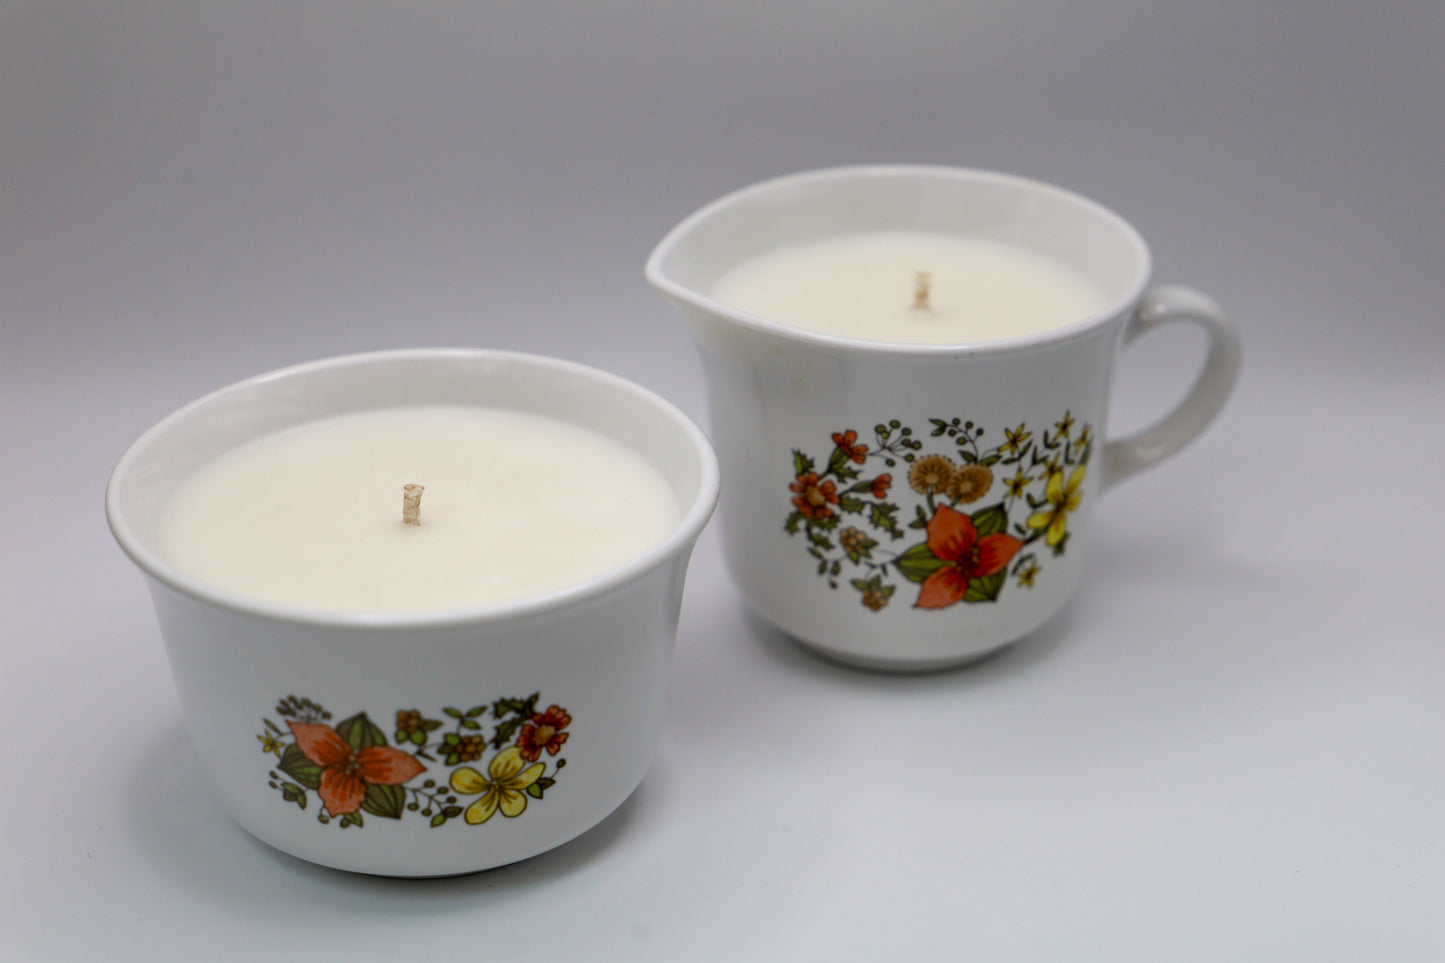 Corelle Indian Summer Creamer and Sugar Set with Lavender scented soy candles.